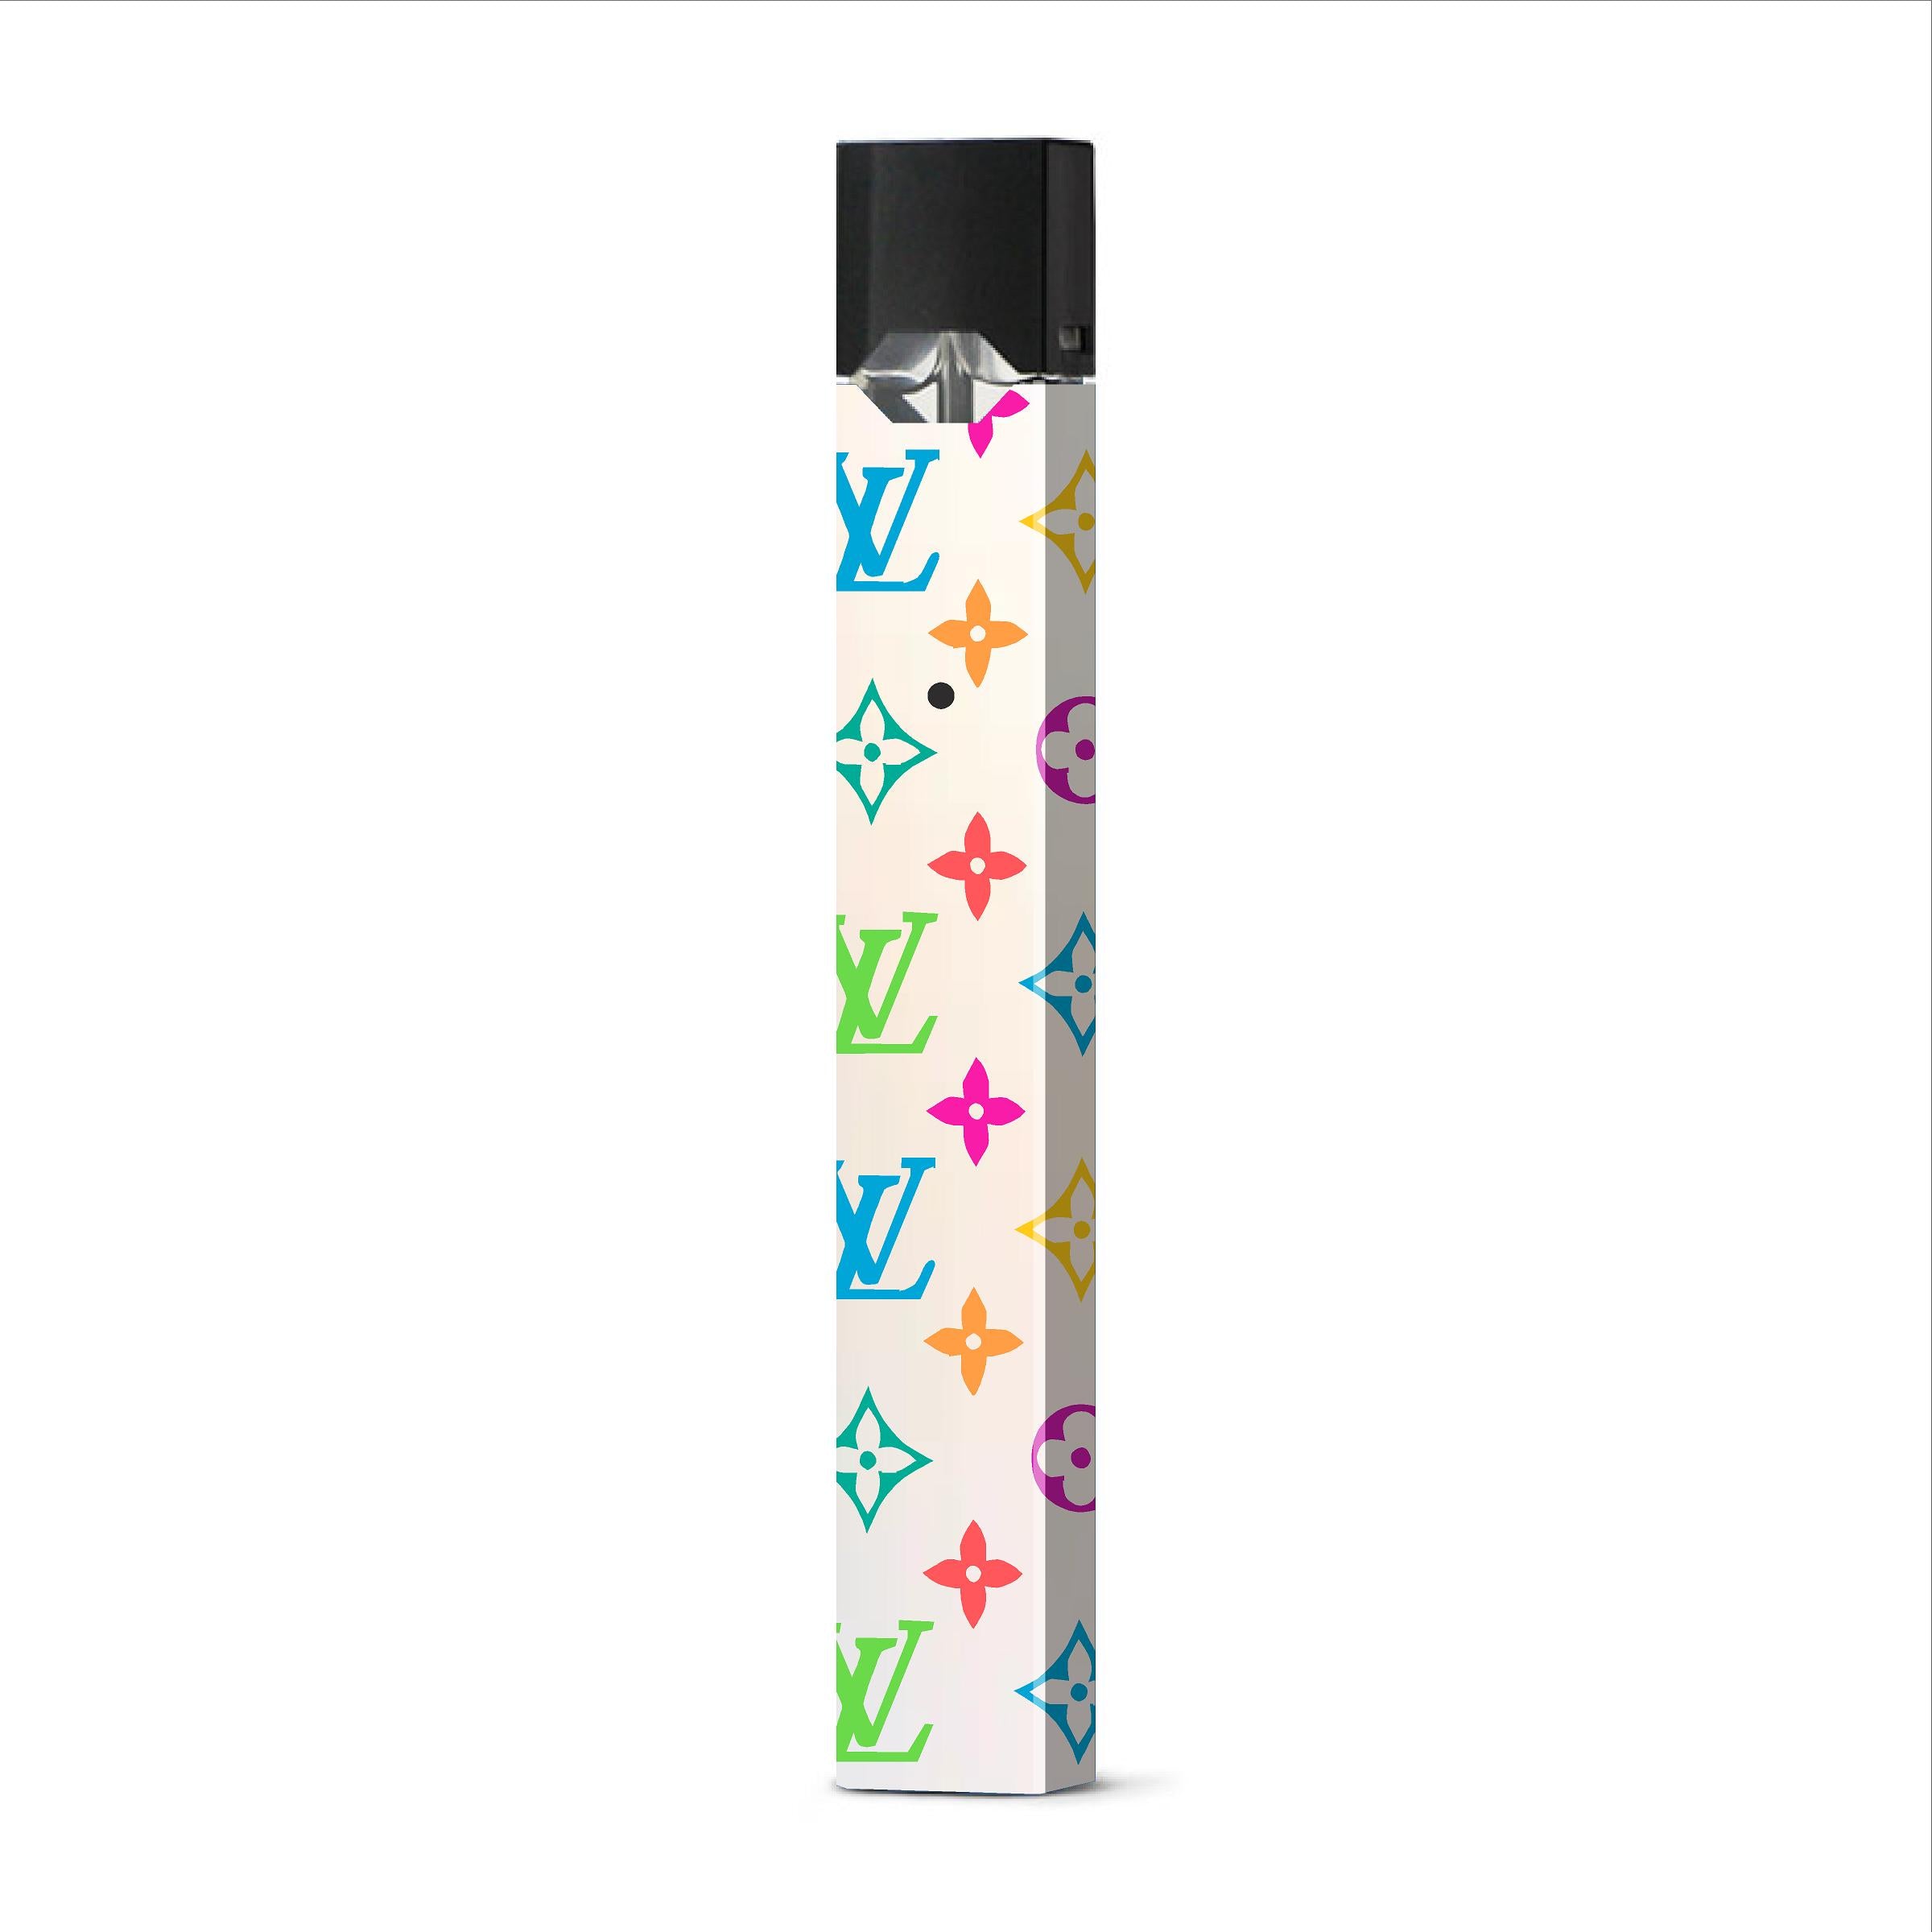 Skin+Decal+Wrap+for+JUUL+Louis+Vuitton+LV+Vinyl+Charger+Decor+Sticker+2+Pack  for sale online